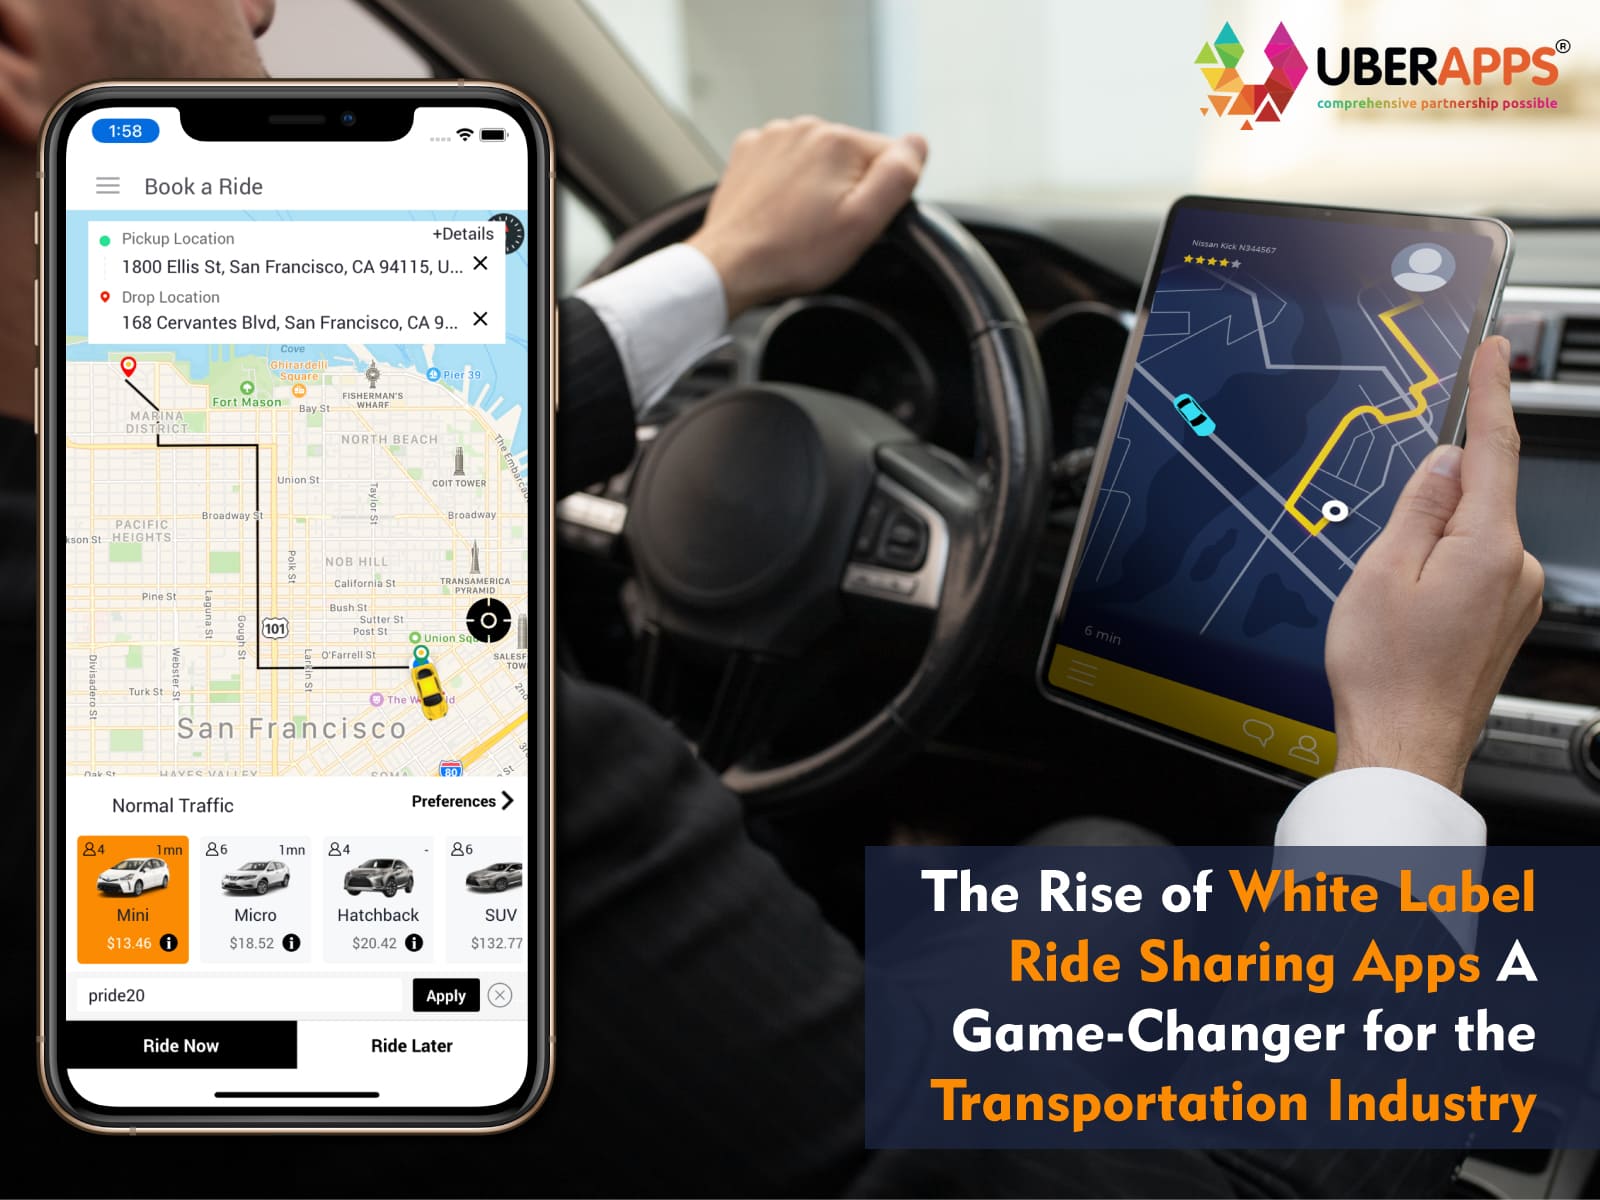 The Rise Of White Label Ride Sharing Apps: A Game-changer For The Transportation Industry